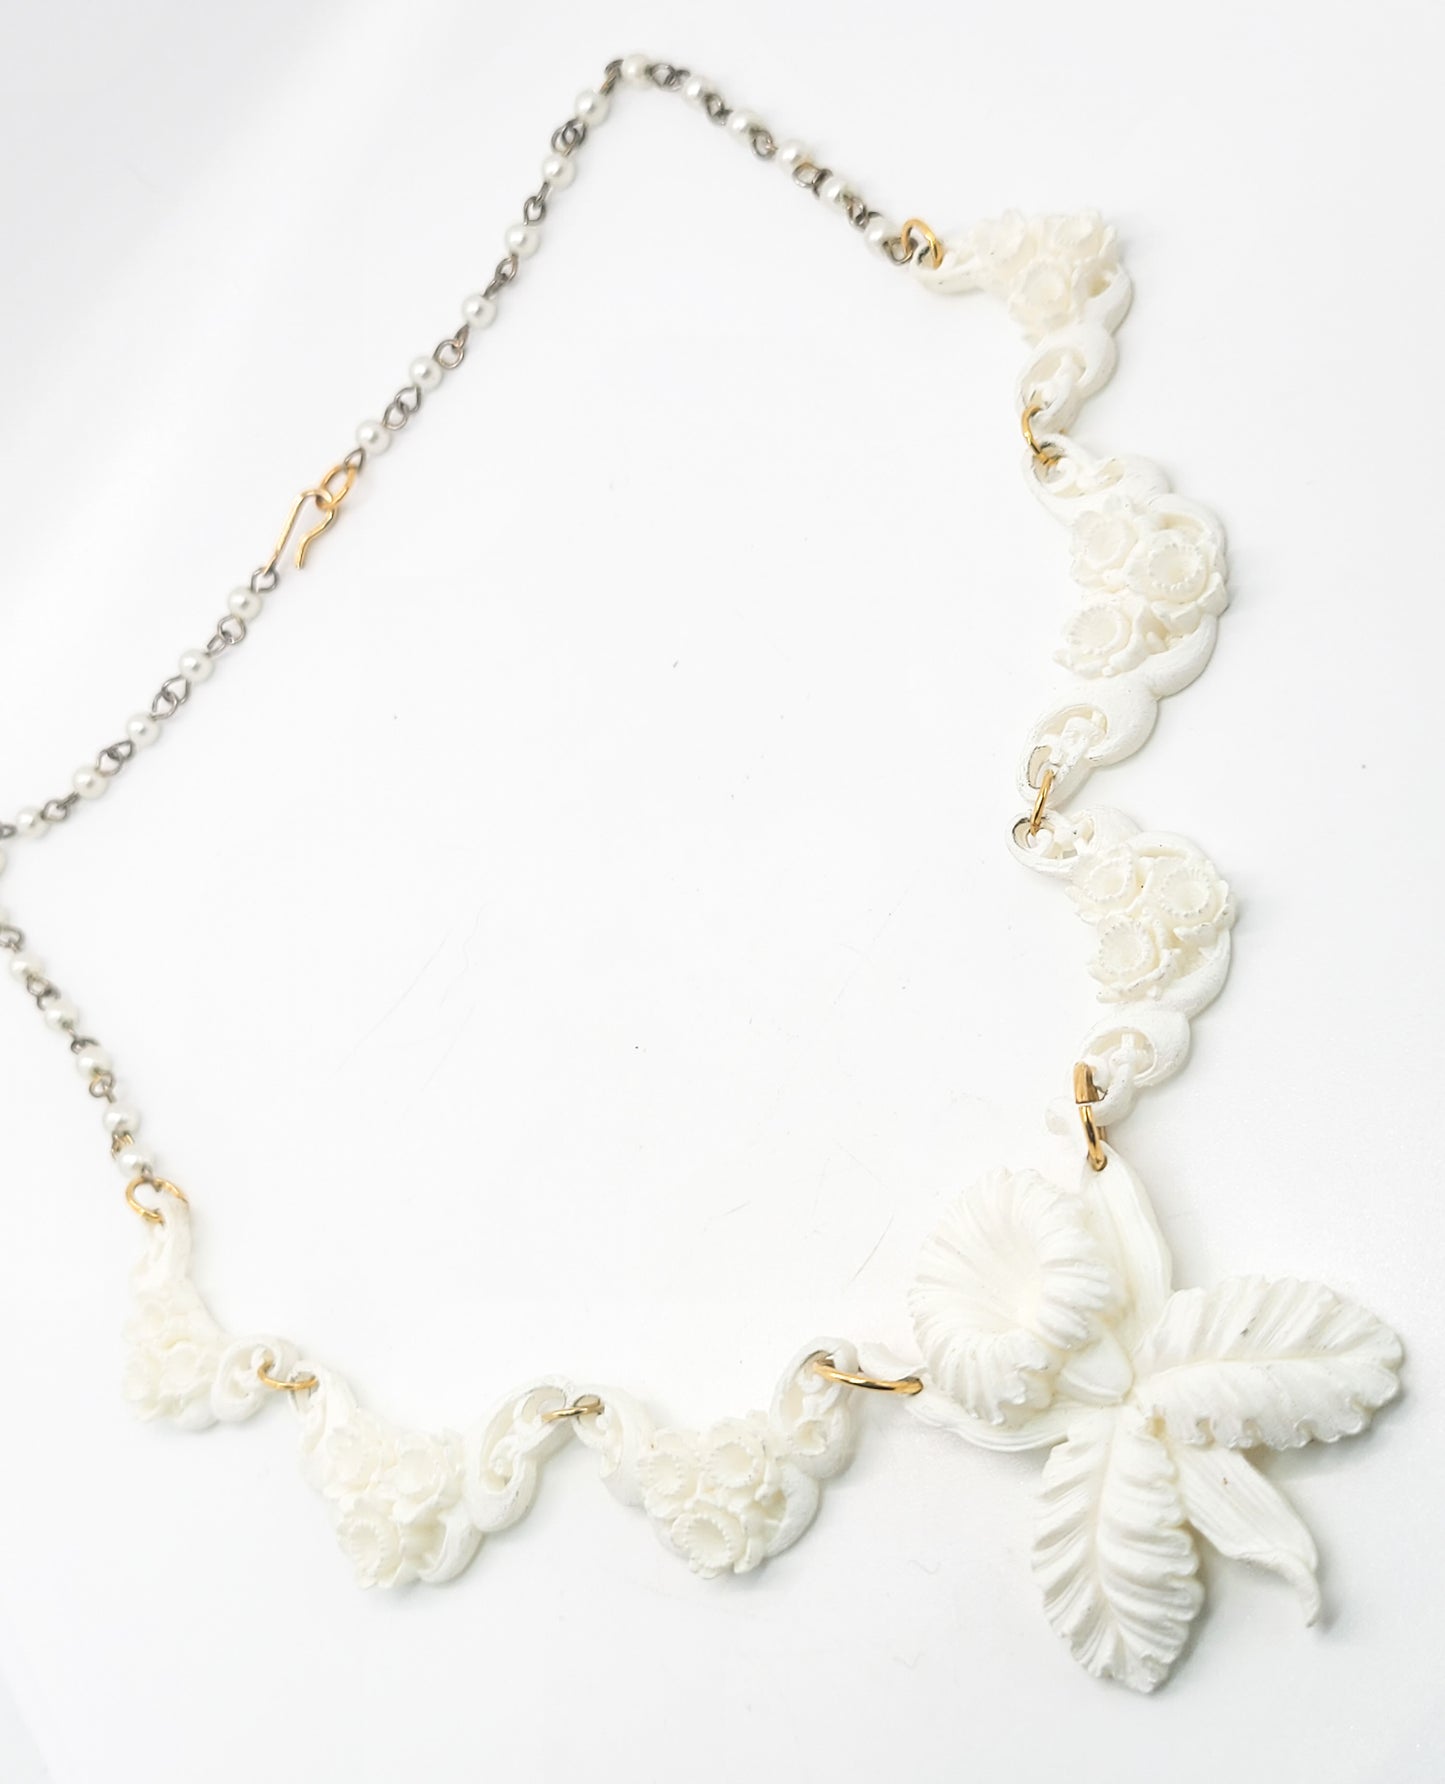 Carved Celluloid white Iris flower faux pearl bib vintage statement necklace